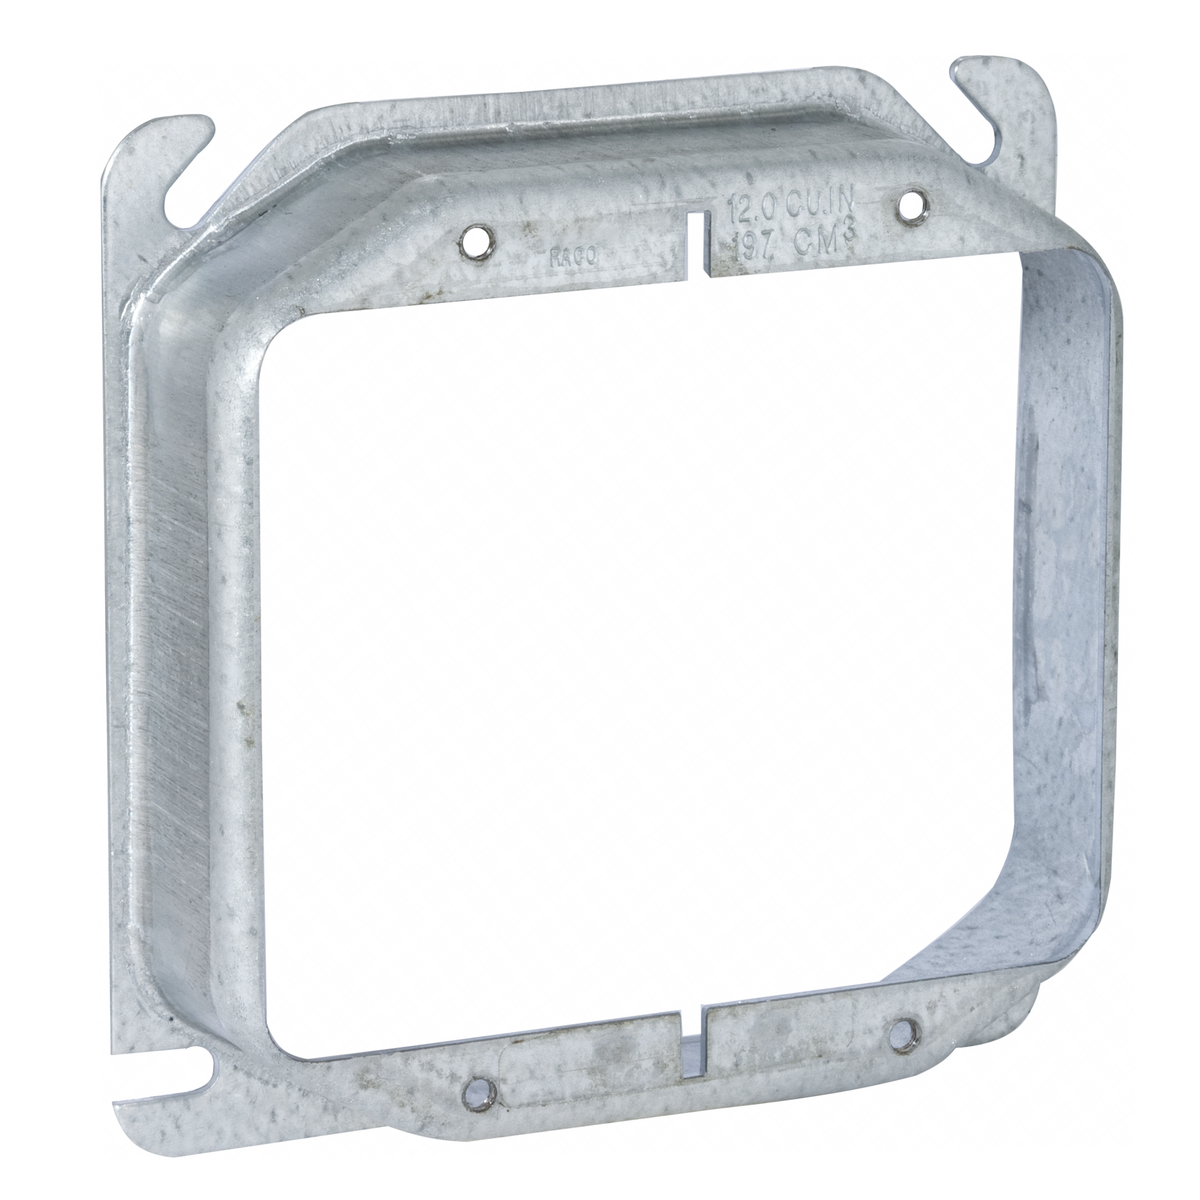 RACO 780 4" SQUARE MUD-RING, TWO DEVICE, RAISED 1"